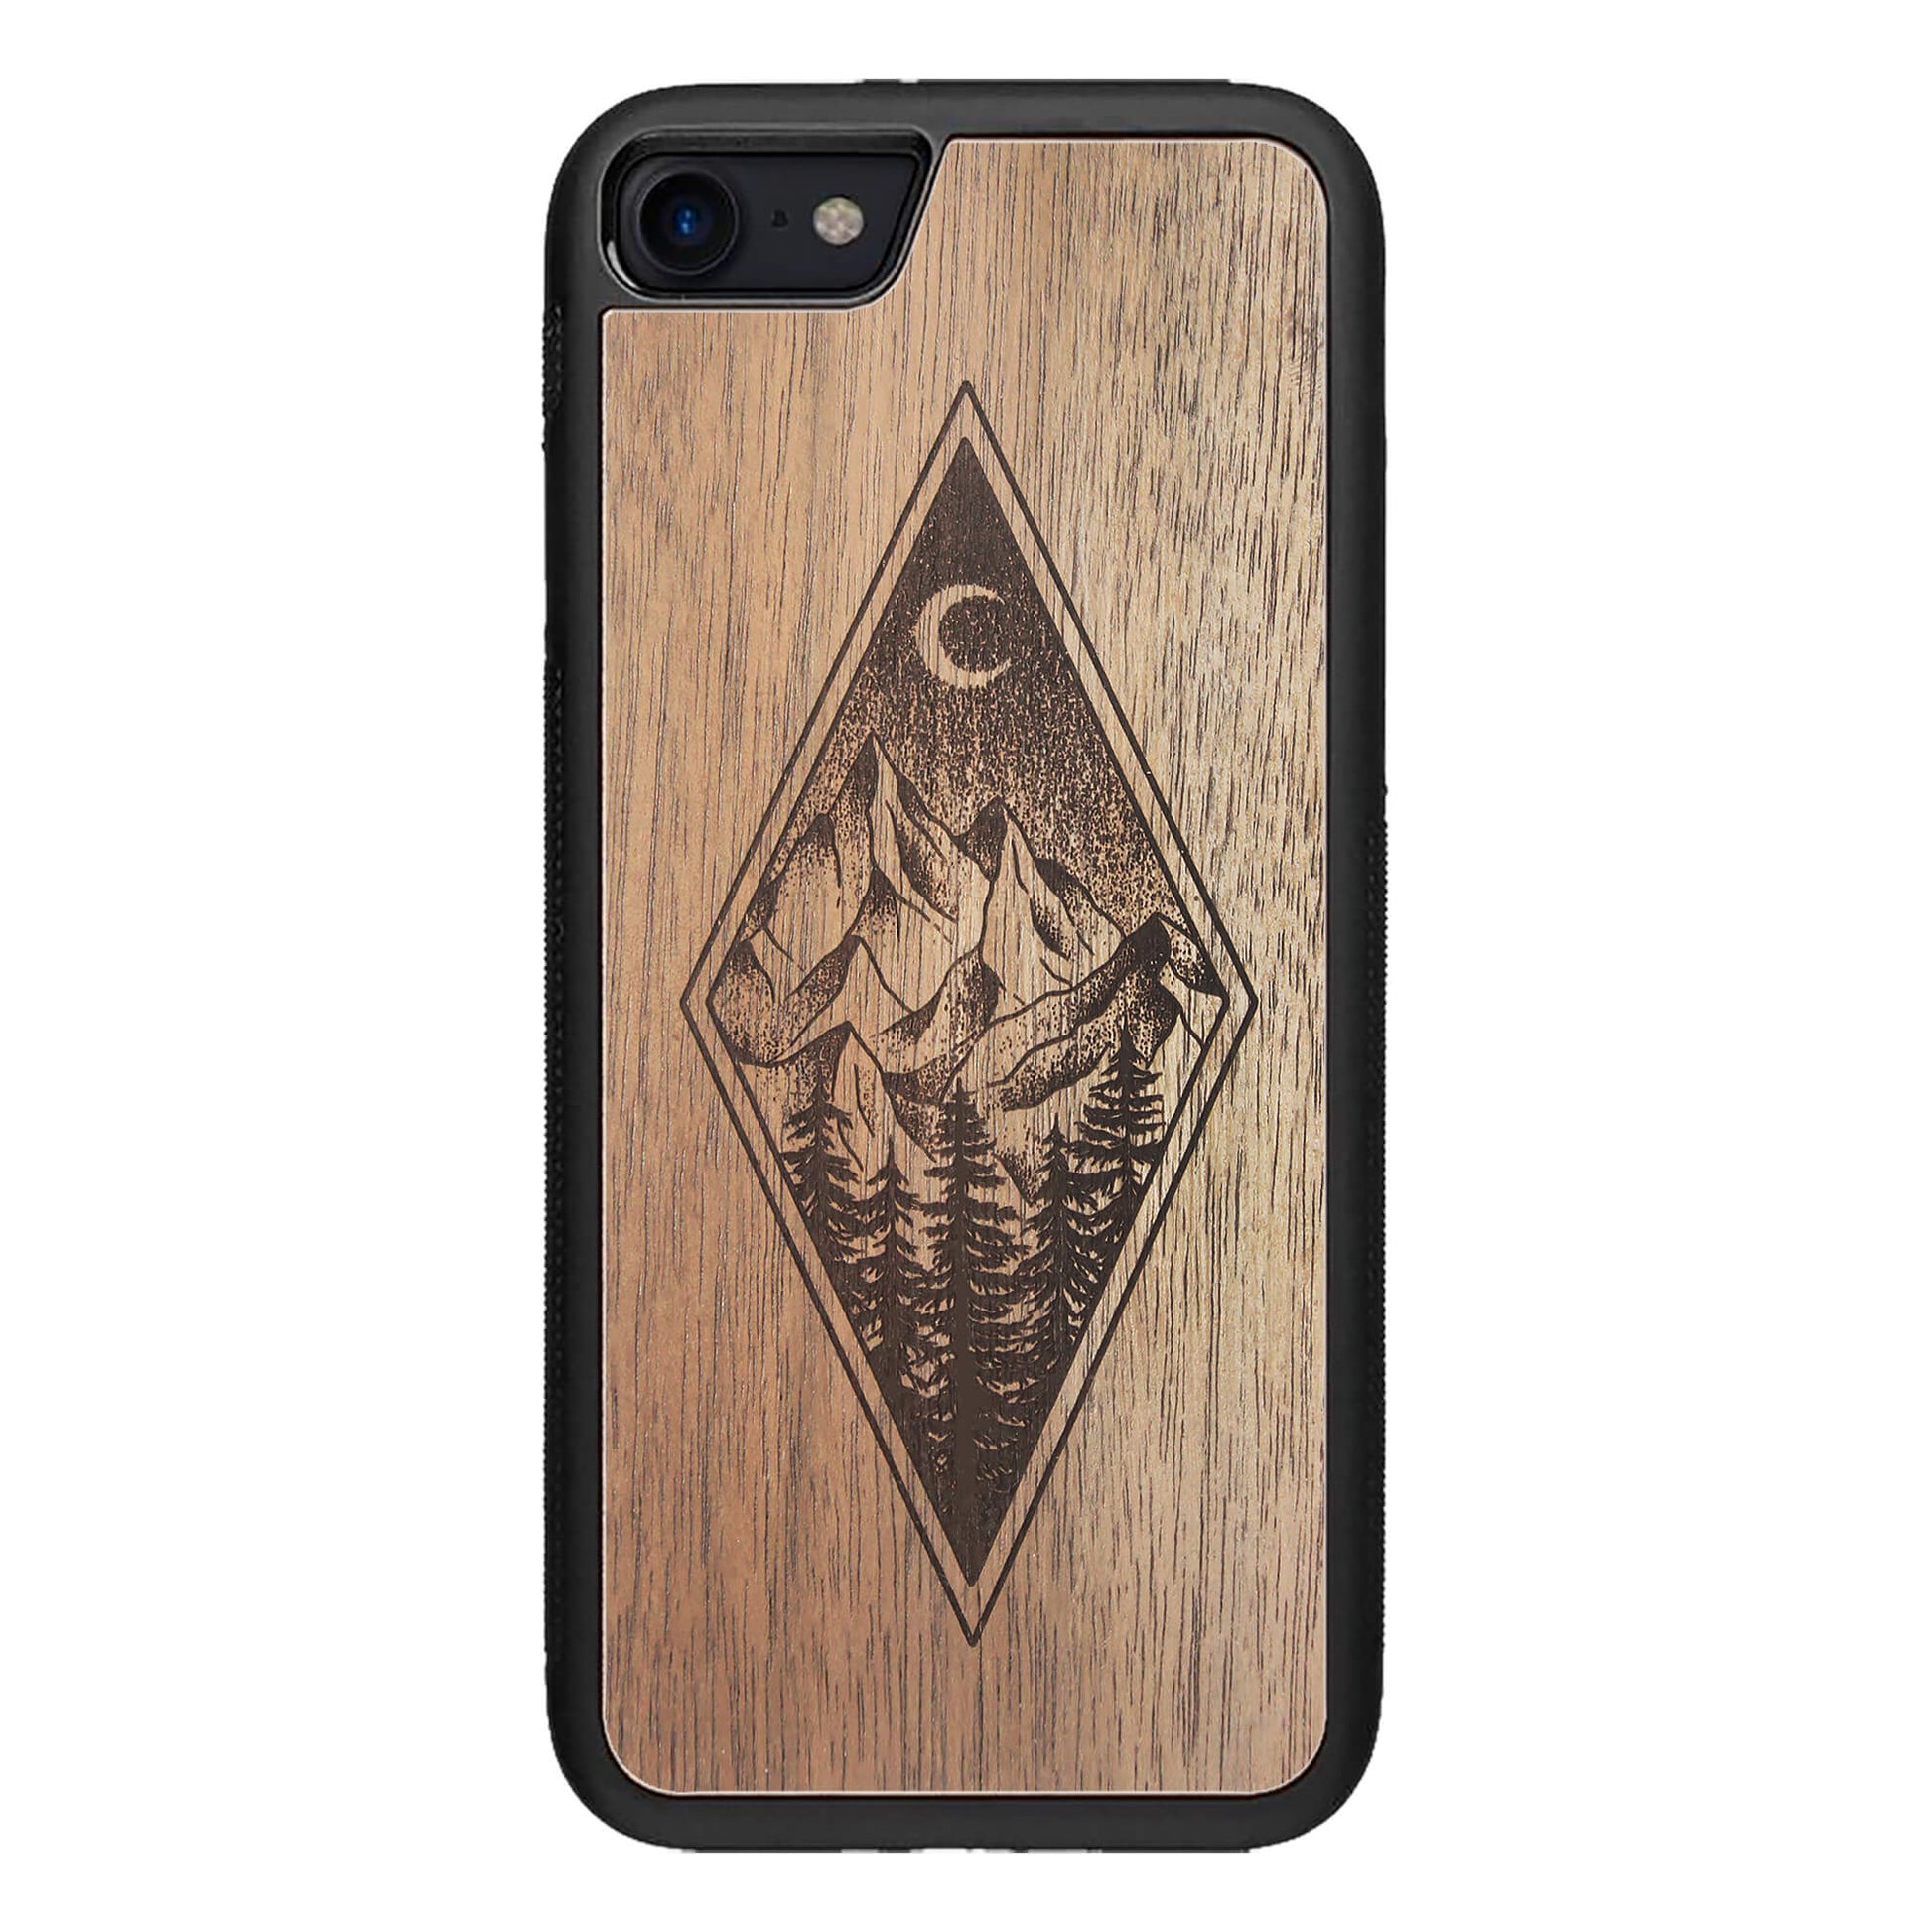 Wooden Case for iPhone SE 3 generation case Mountain Night